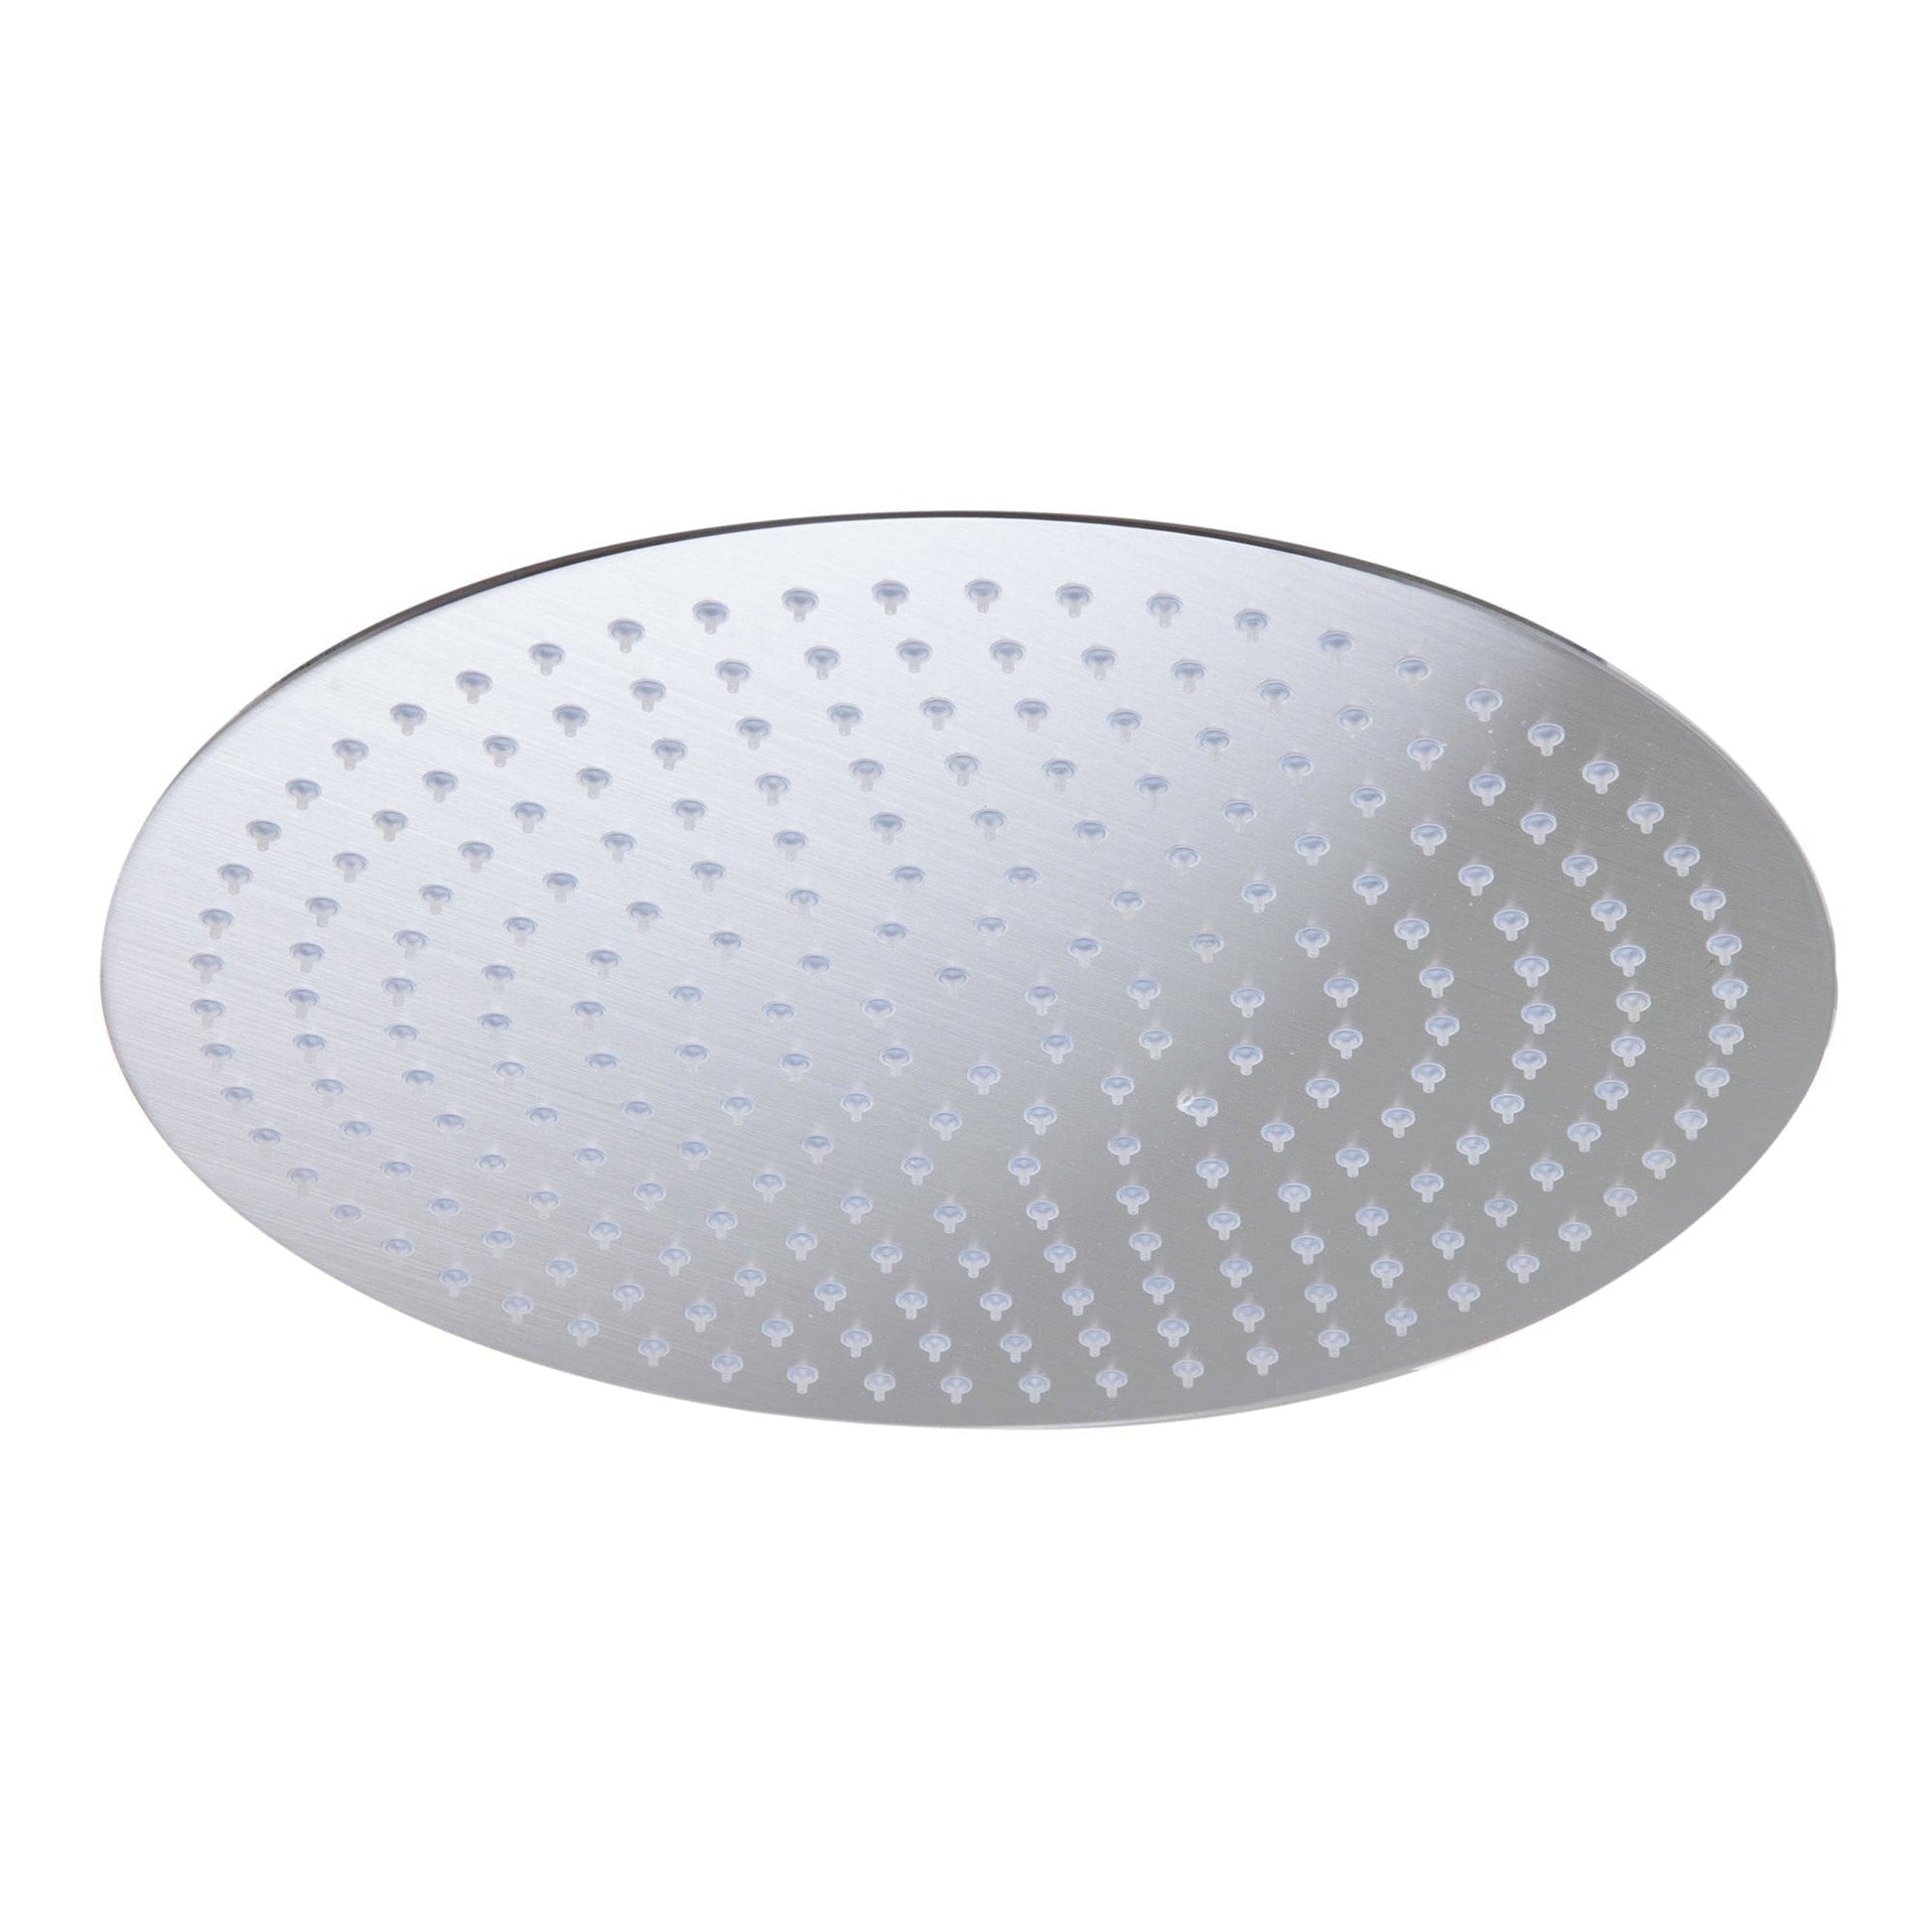 ALFI Brand RAIN16R-BSS 16" Round Solid Brushed Stainless Steel Wall or Ceiling Mounted Ultra Thin Rain Brass Shower Head